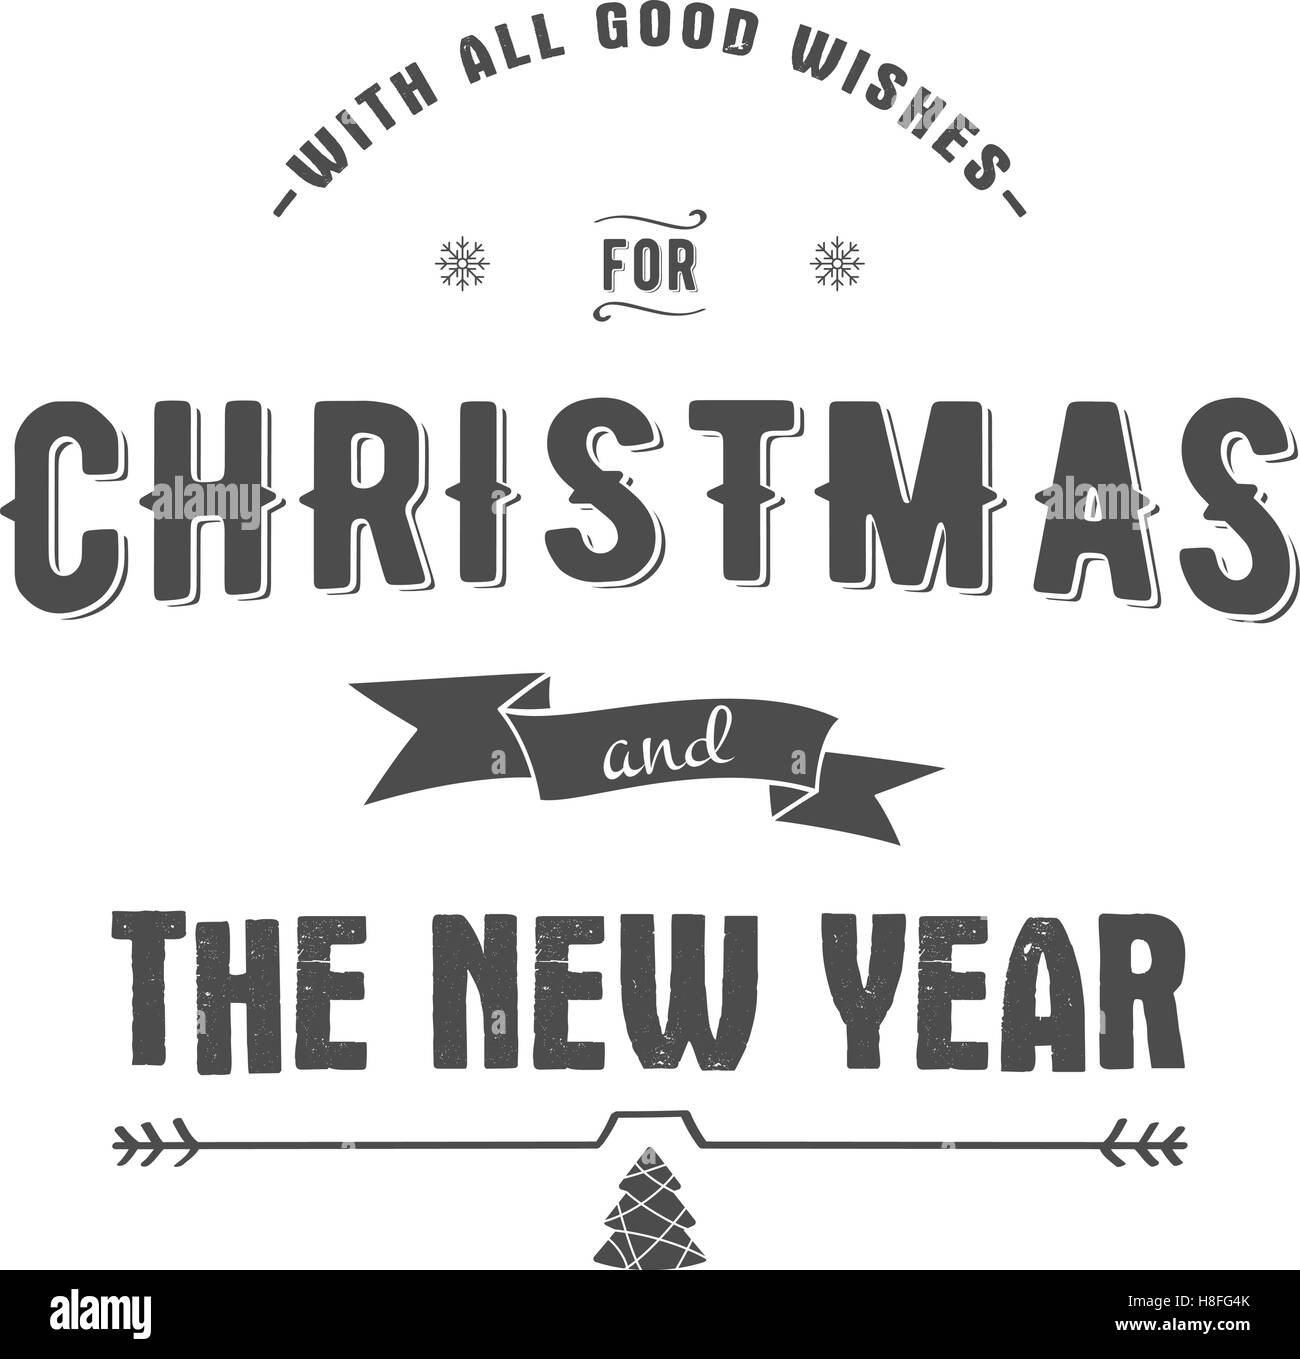 Merry Christmas lettering Wishes Vector clipart for Holiday season cards posters banners